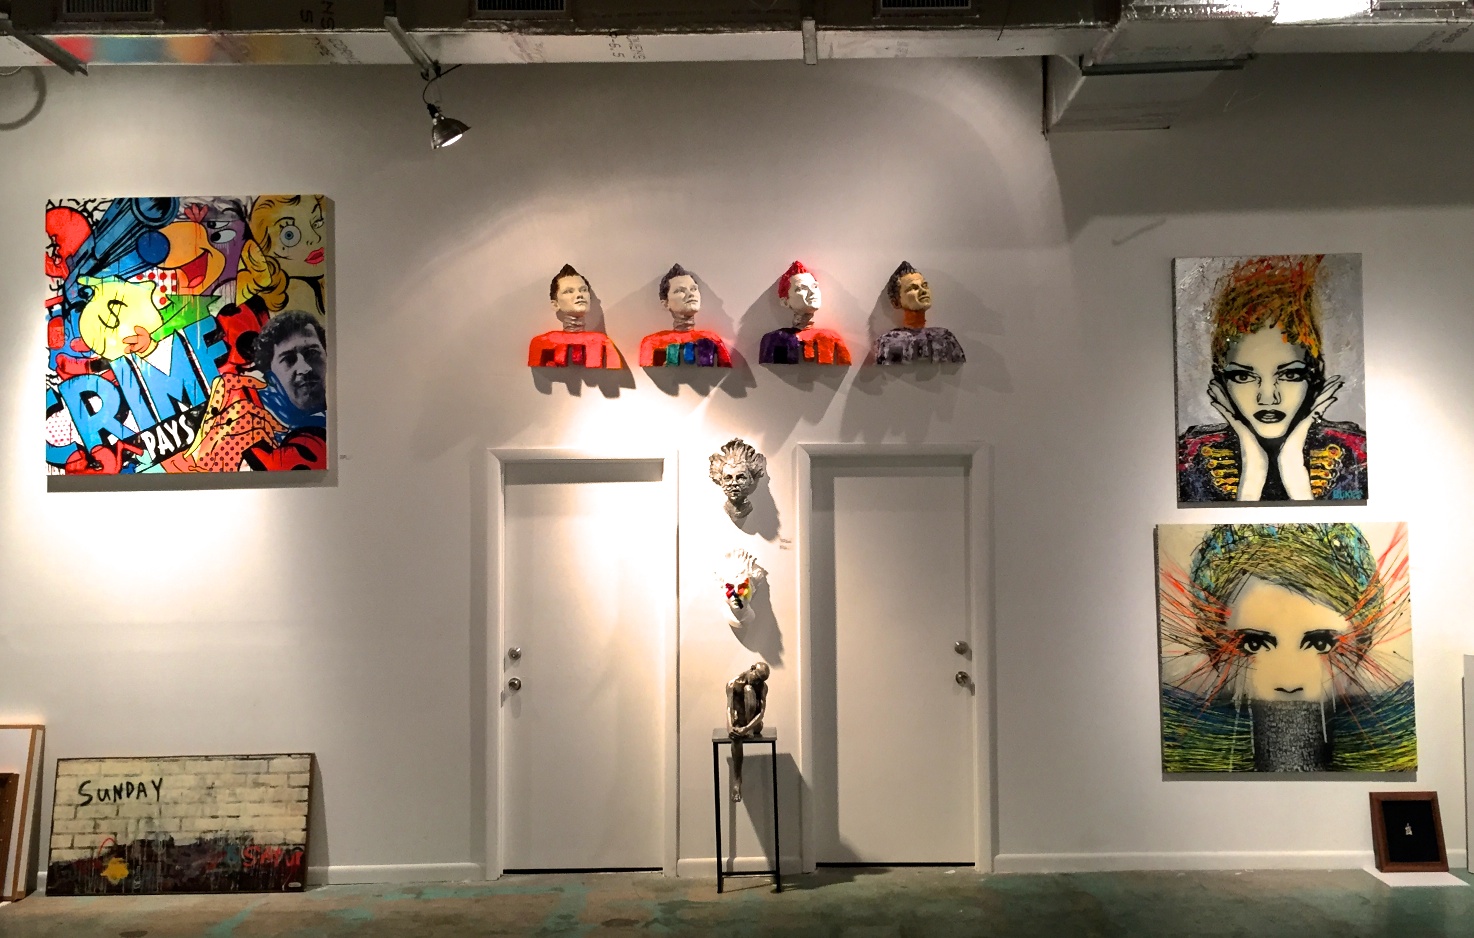  Setup view, Port of Angels, Wynwood Miami Dec 1-6 2015.&nbsp; With Works by Timmy Sneaks (left) and BLikeMe (right).&nbsp; Top Autumn mask (green) surface decorations in collaboration with Autumn Kioti. #luriegallery 